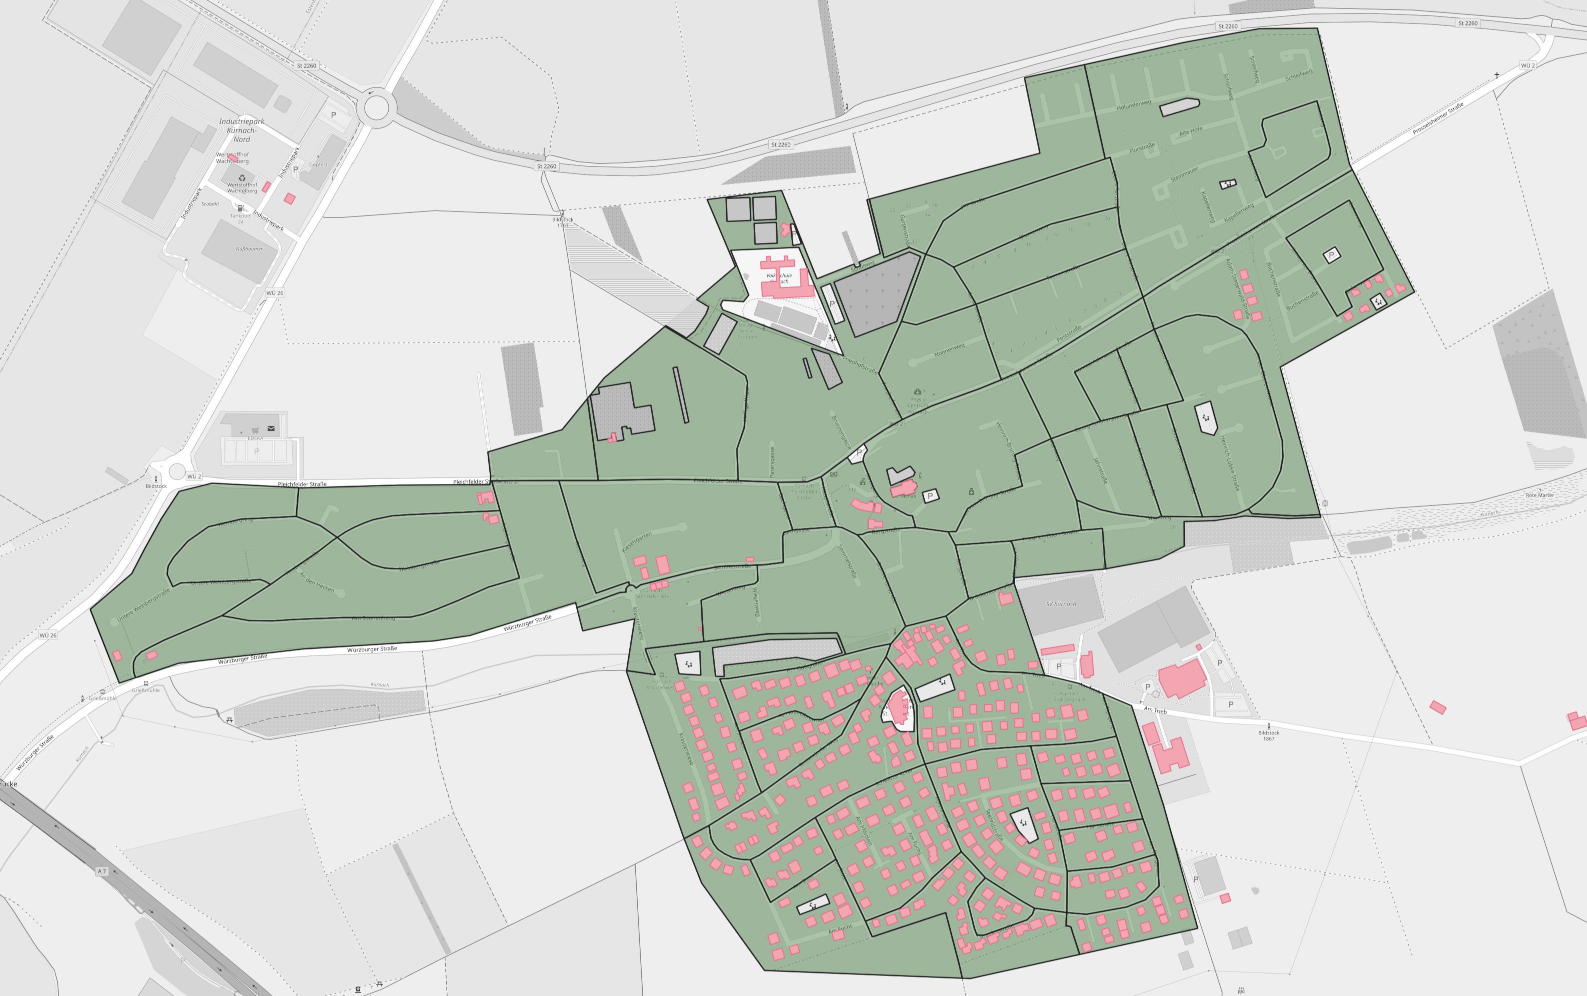 Map of land use areas split into blocks, overlay with buildings